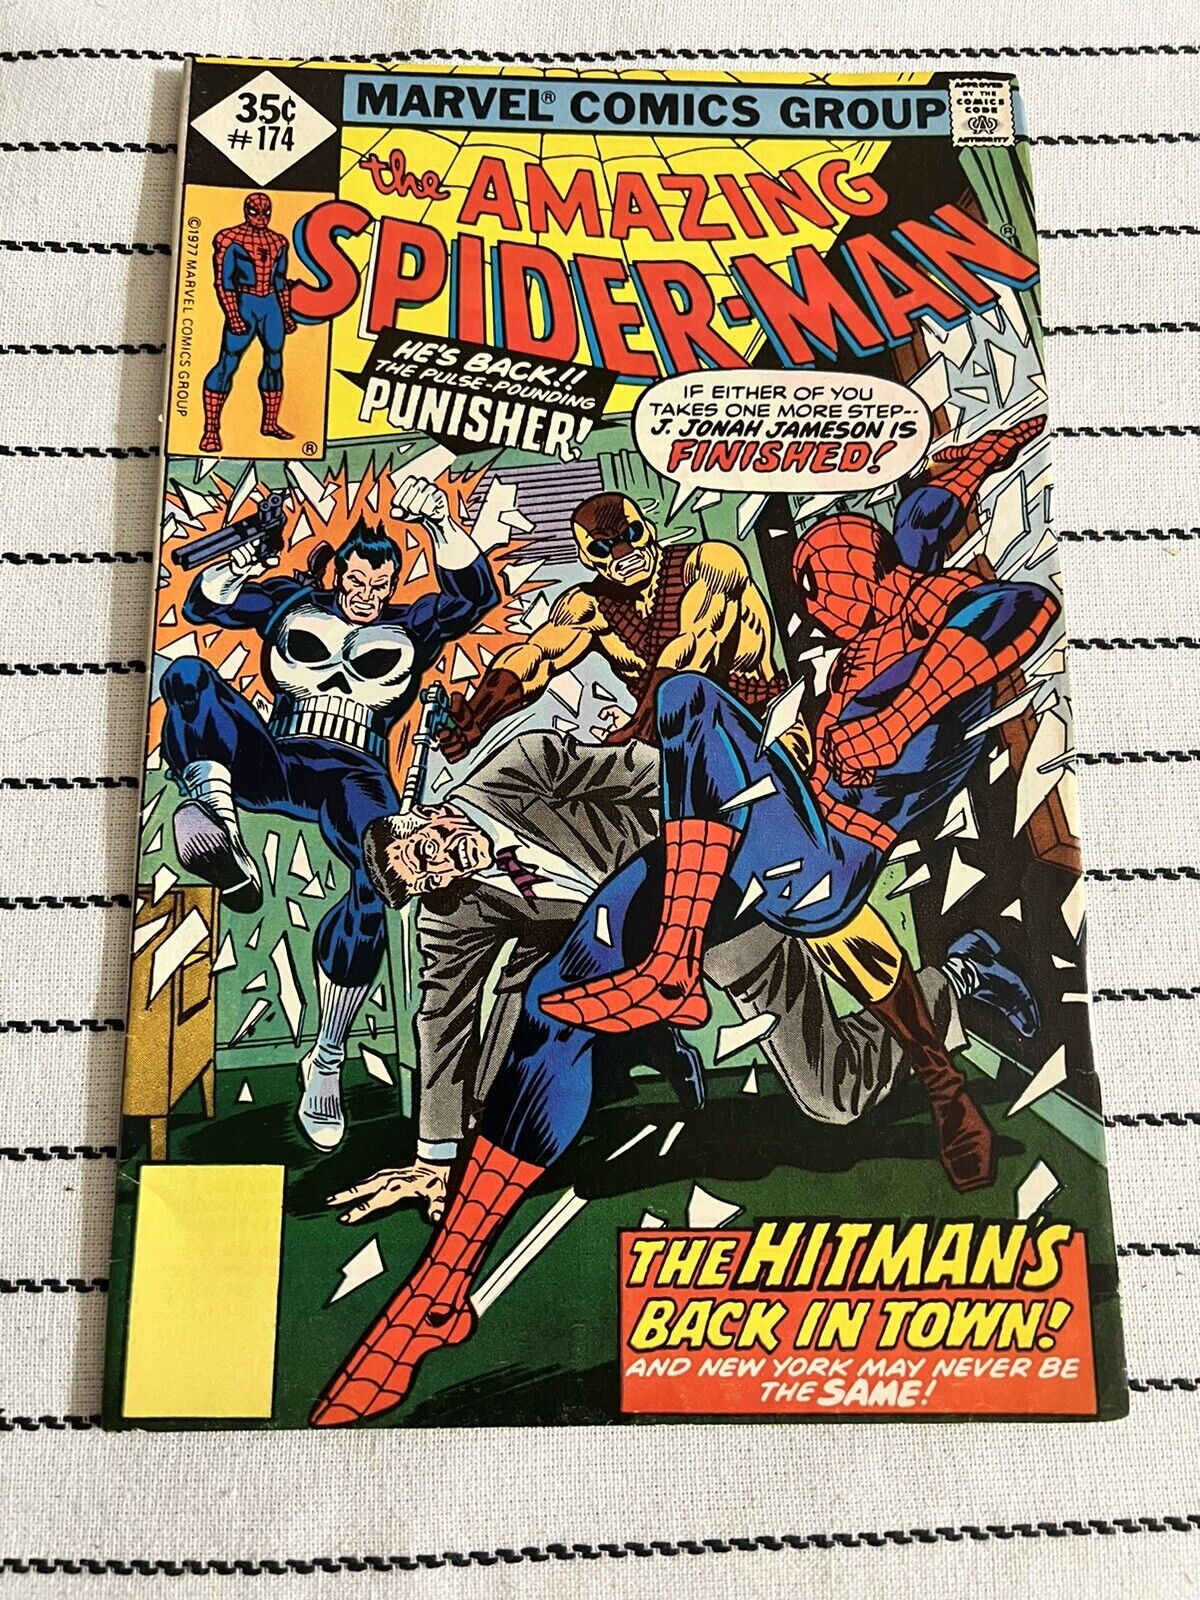 The Amazing Spiderman #174, Guest-starring the Punisher, October 1977